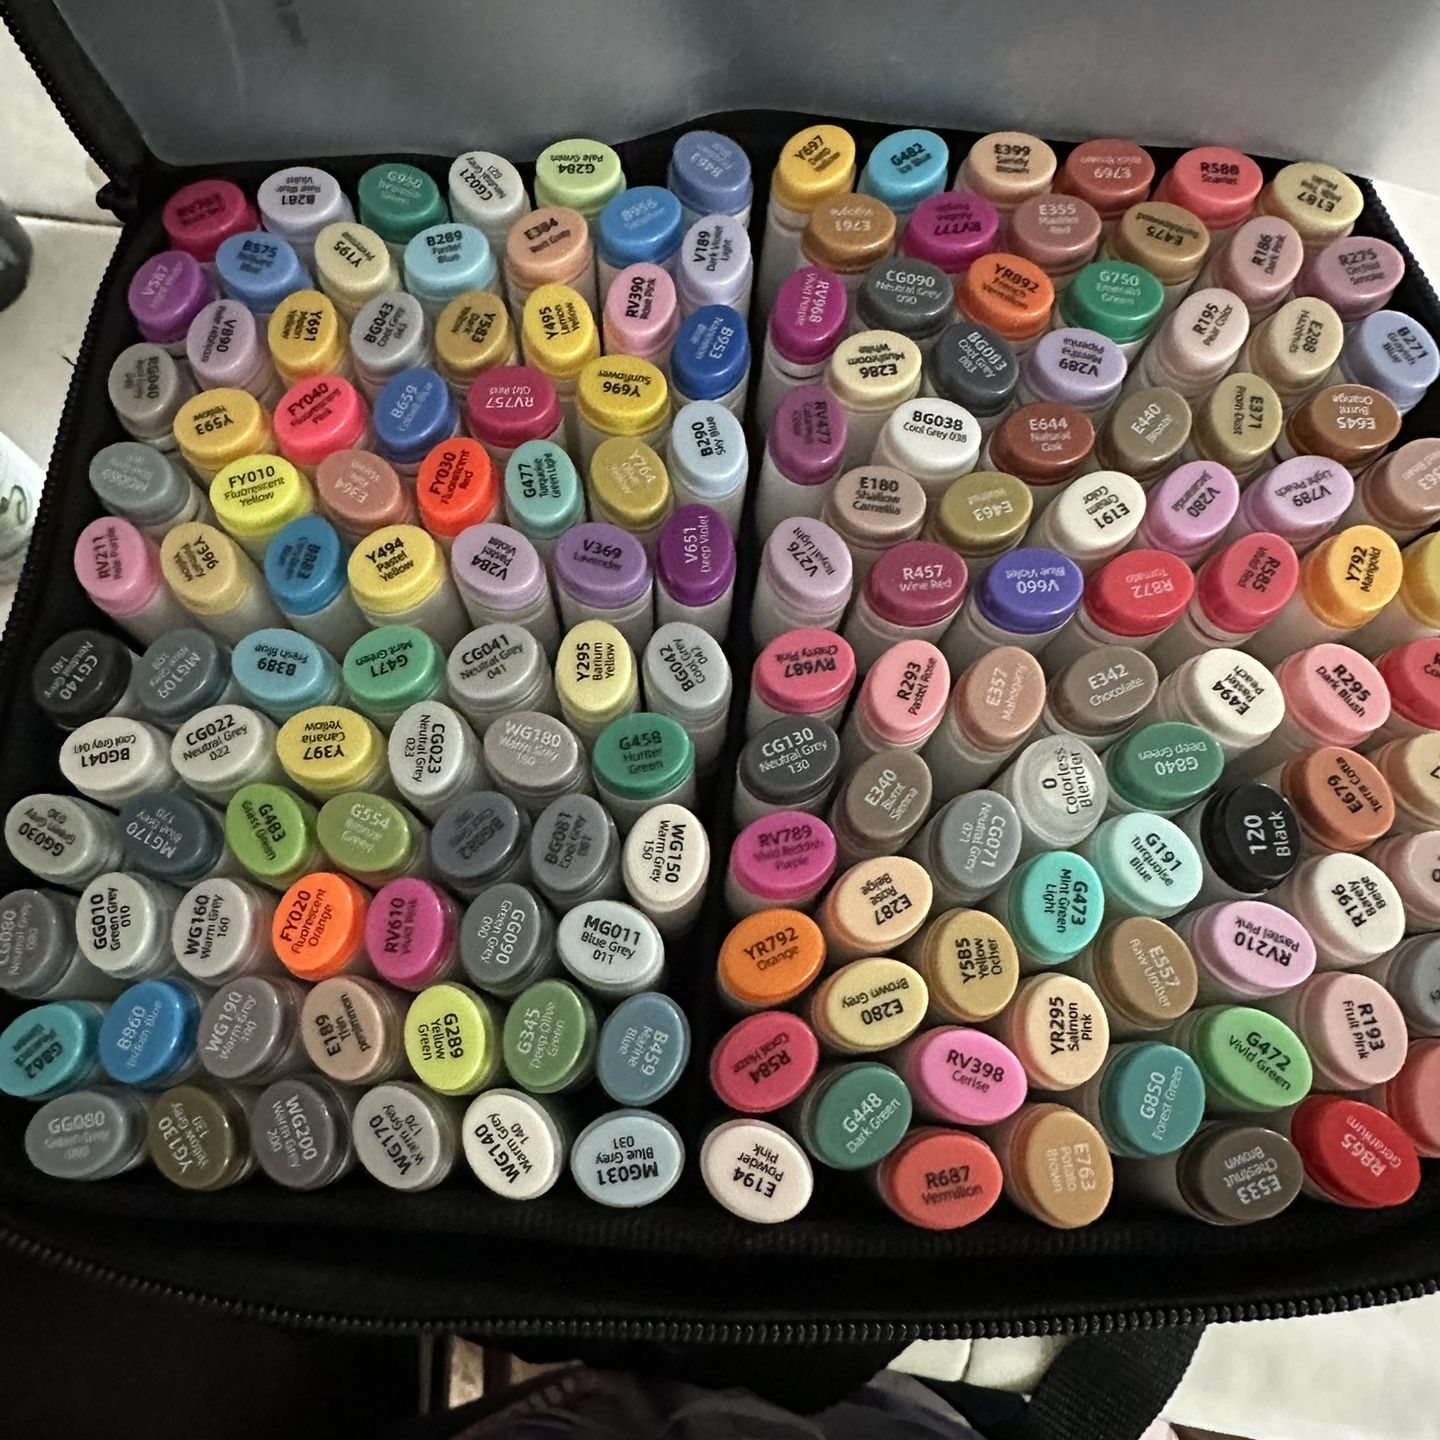 Ohuhu Alcohol based markers - Brand New for Sale in Anaheim, CA - OfferUp